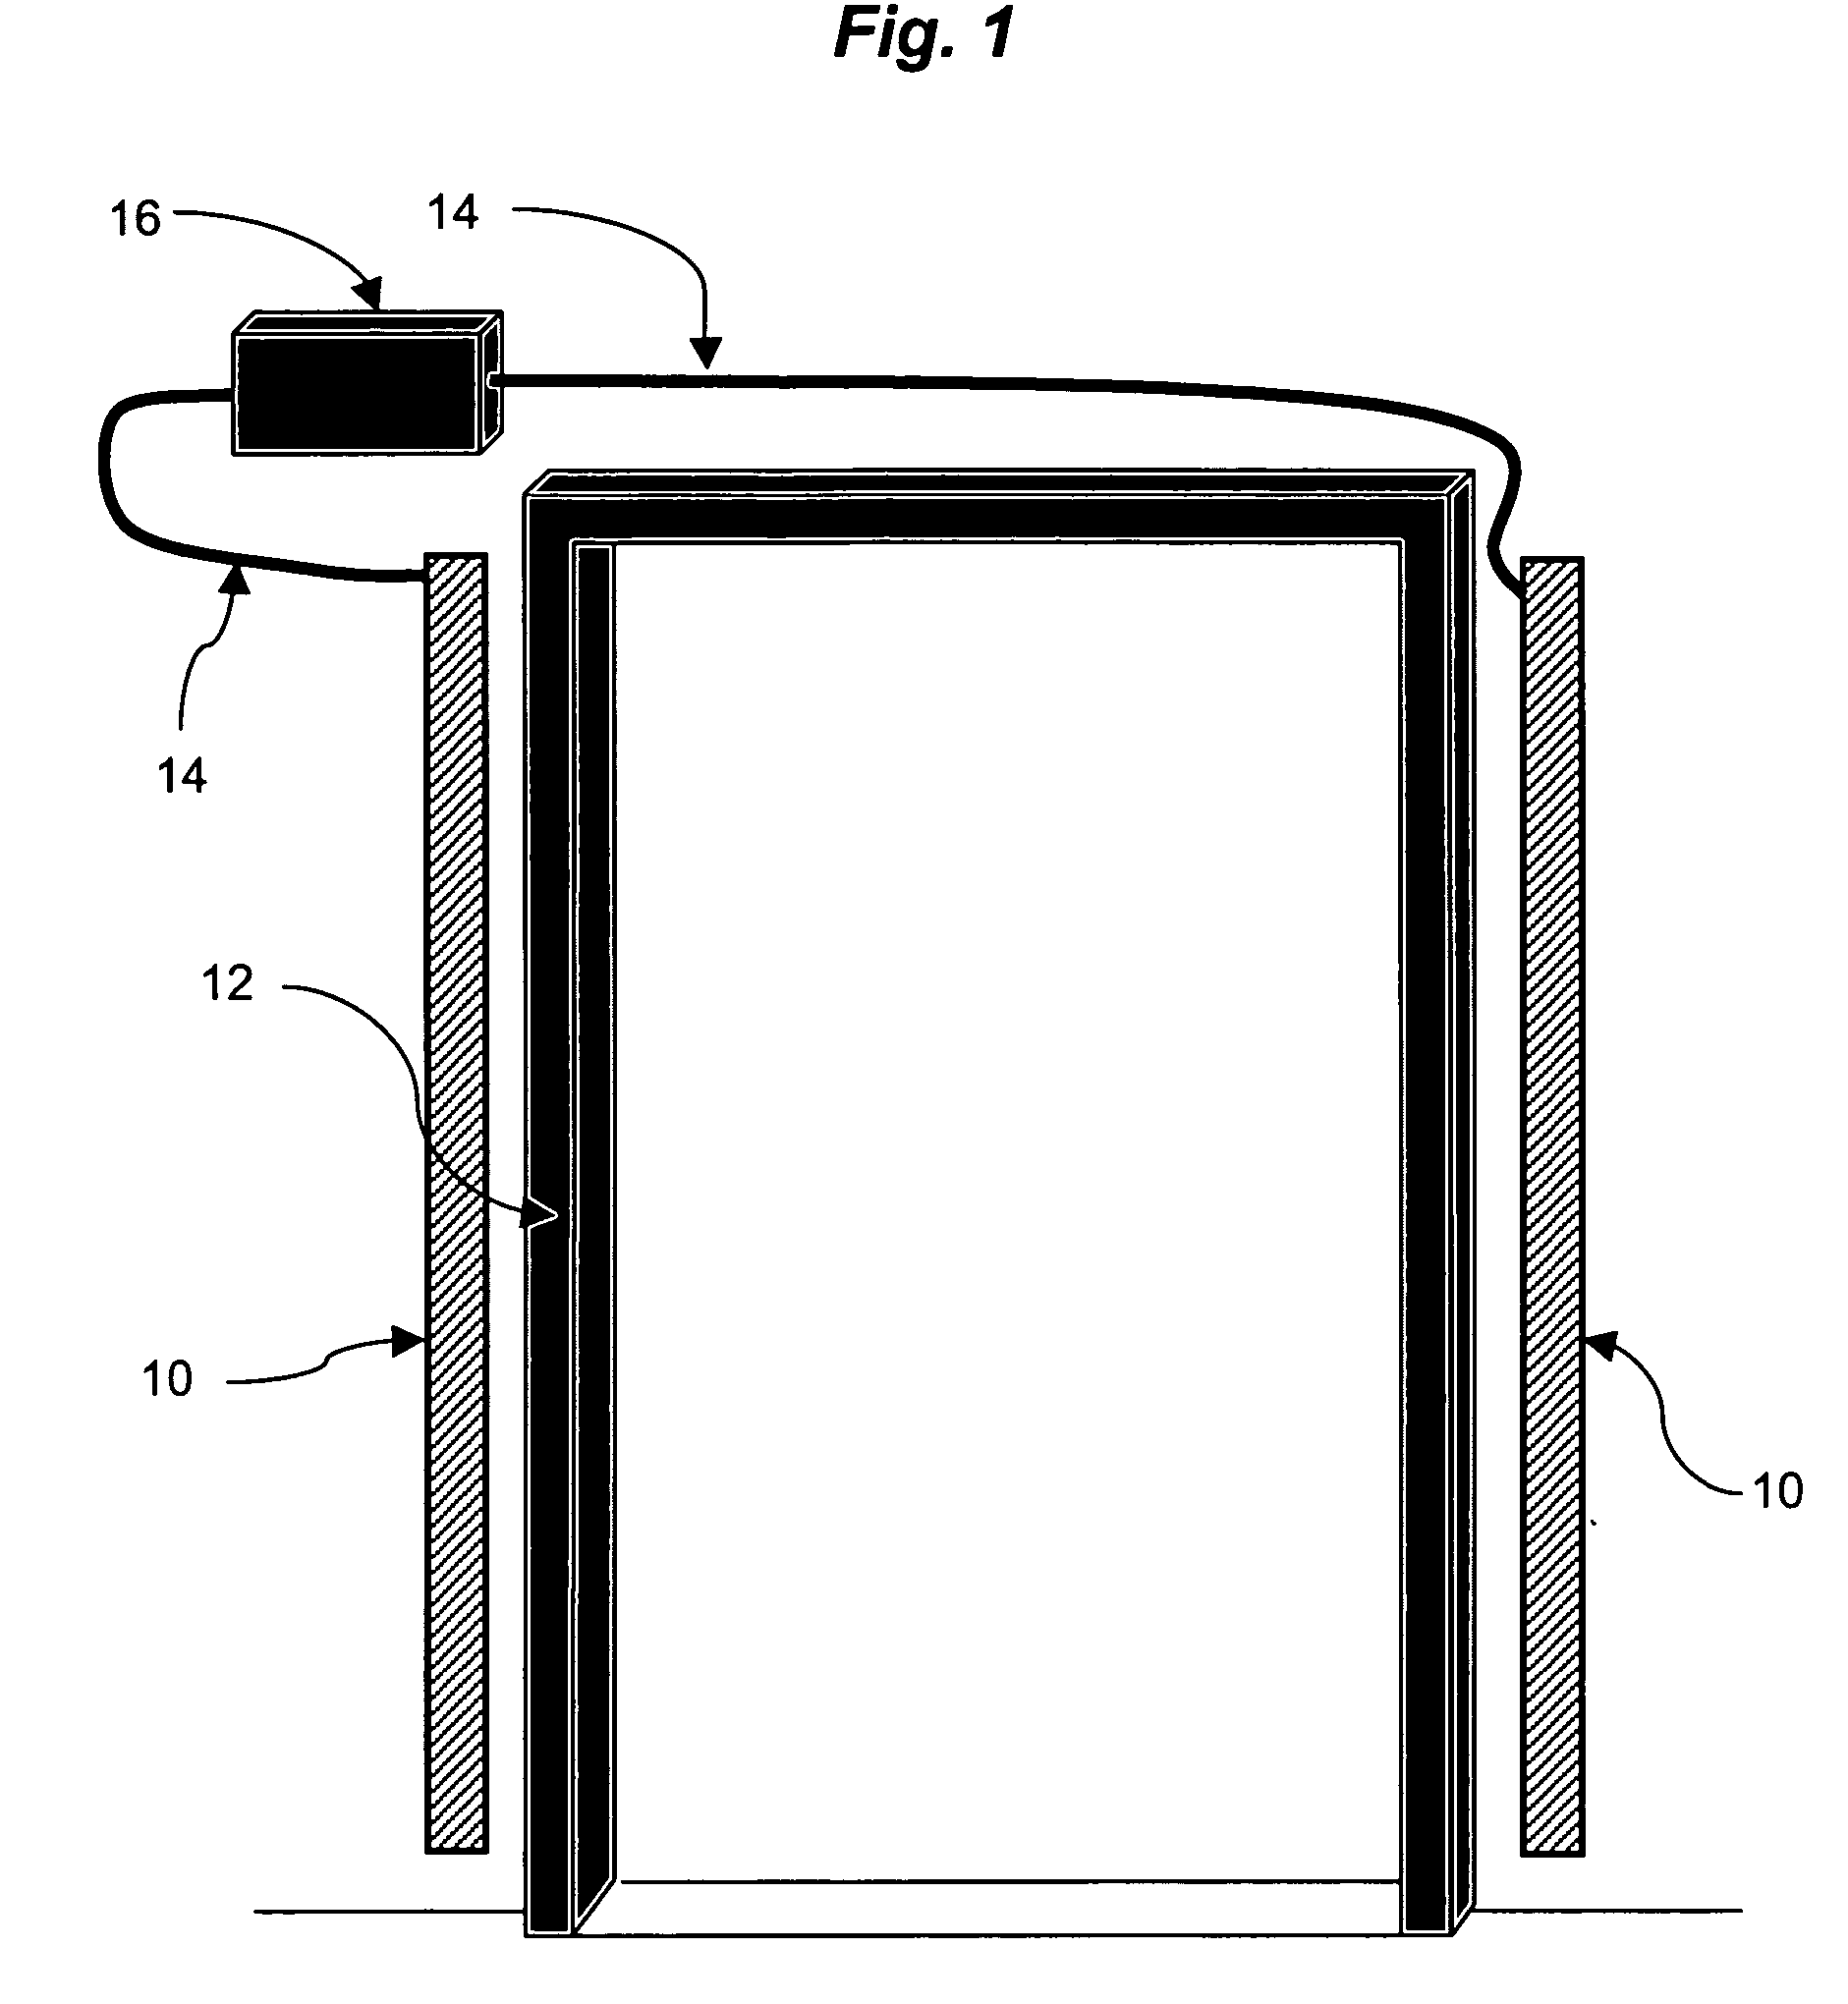 Portal antenna for radio frequency identification